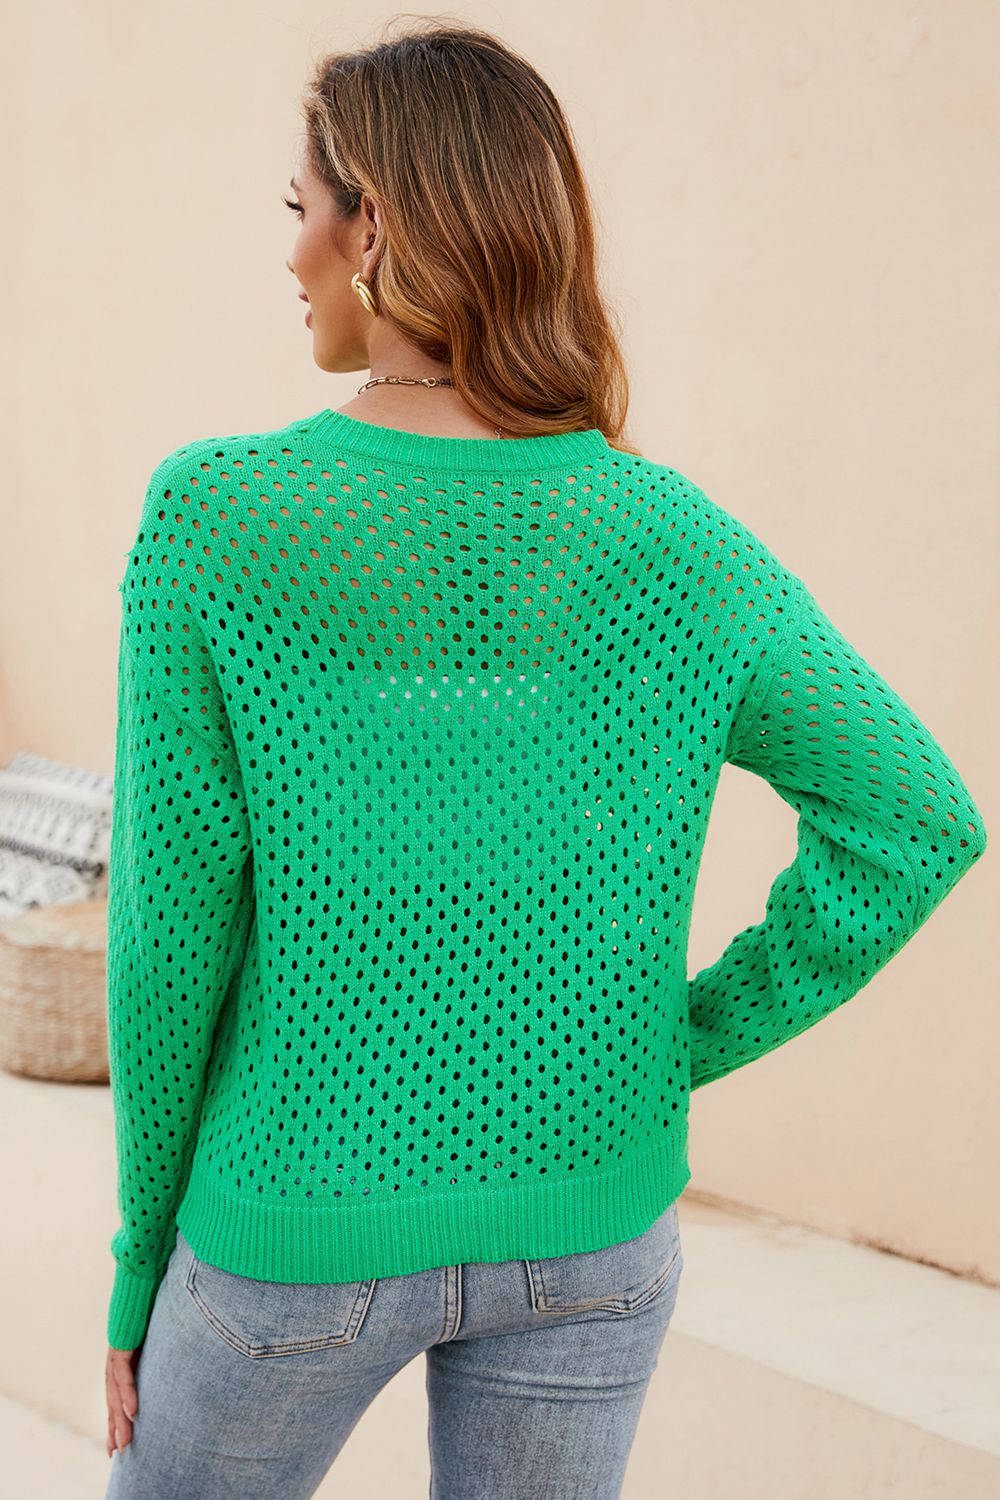 Colored Openwork Knit Top